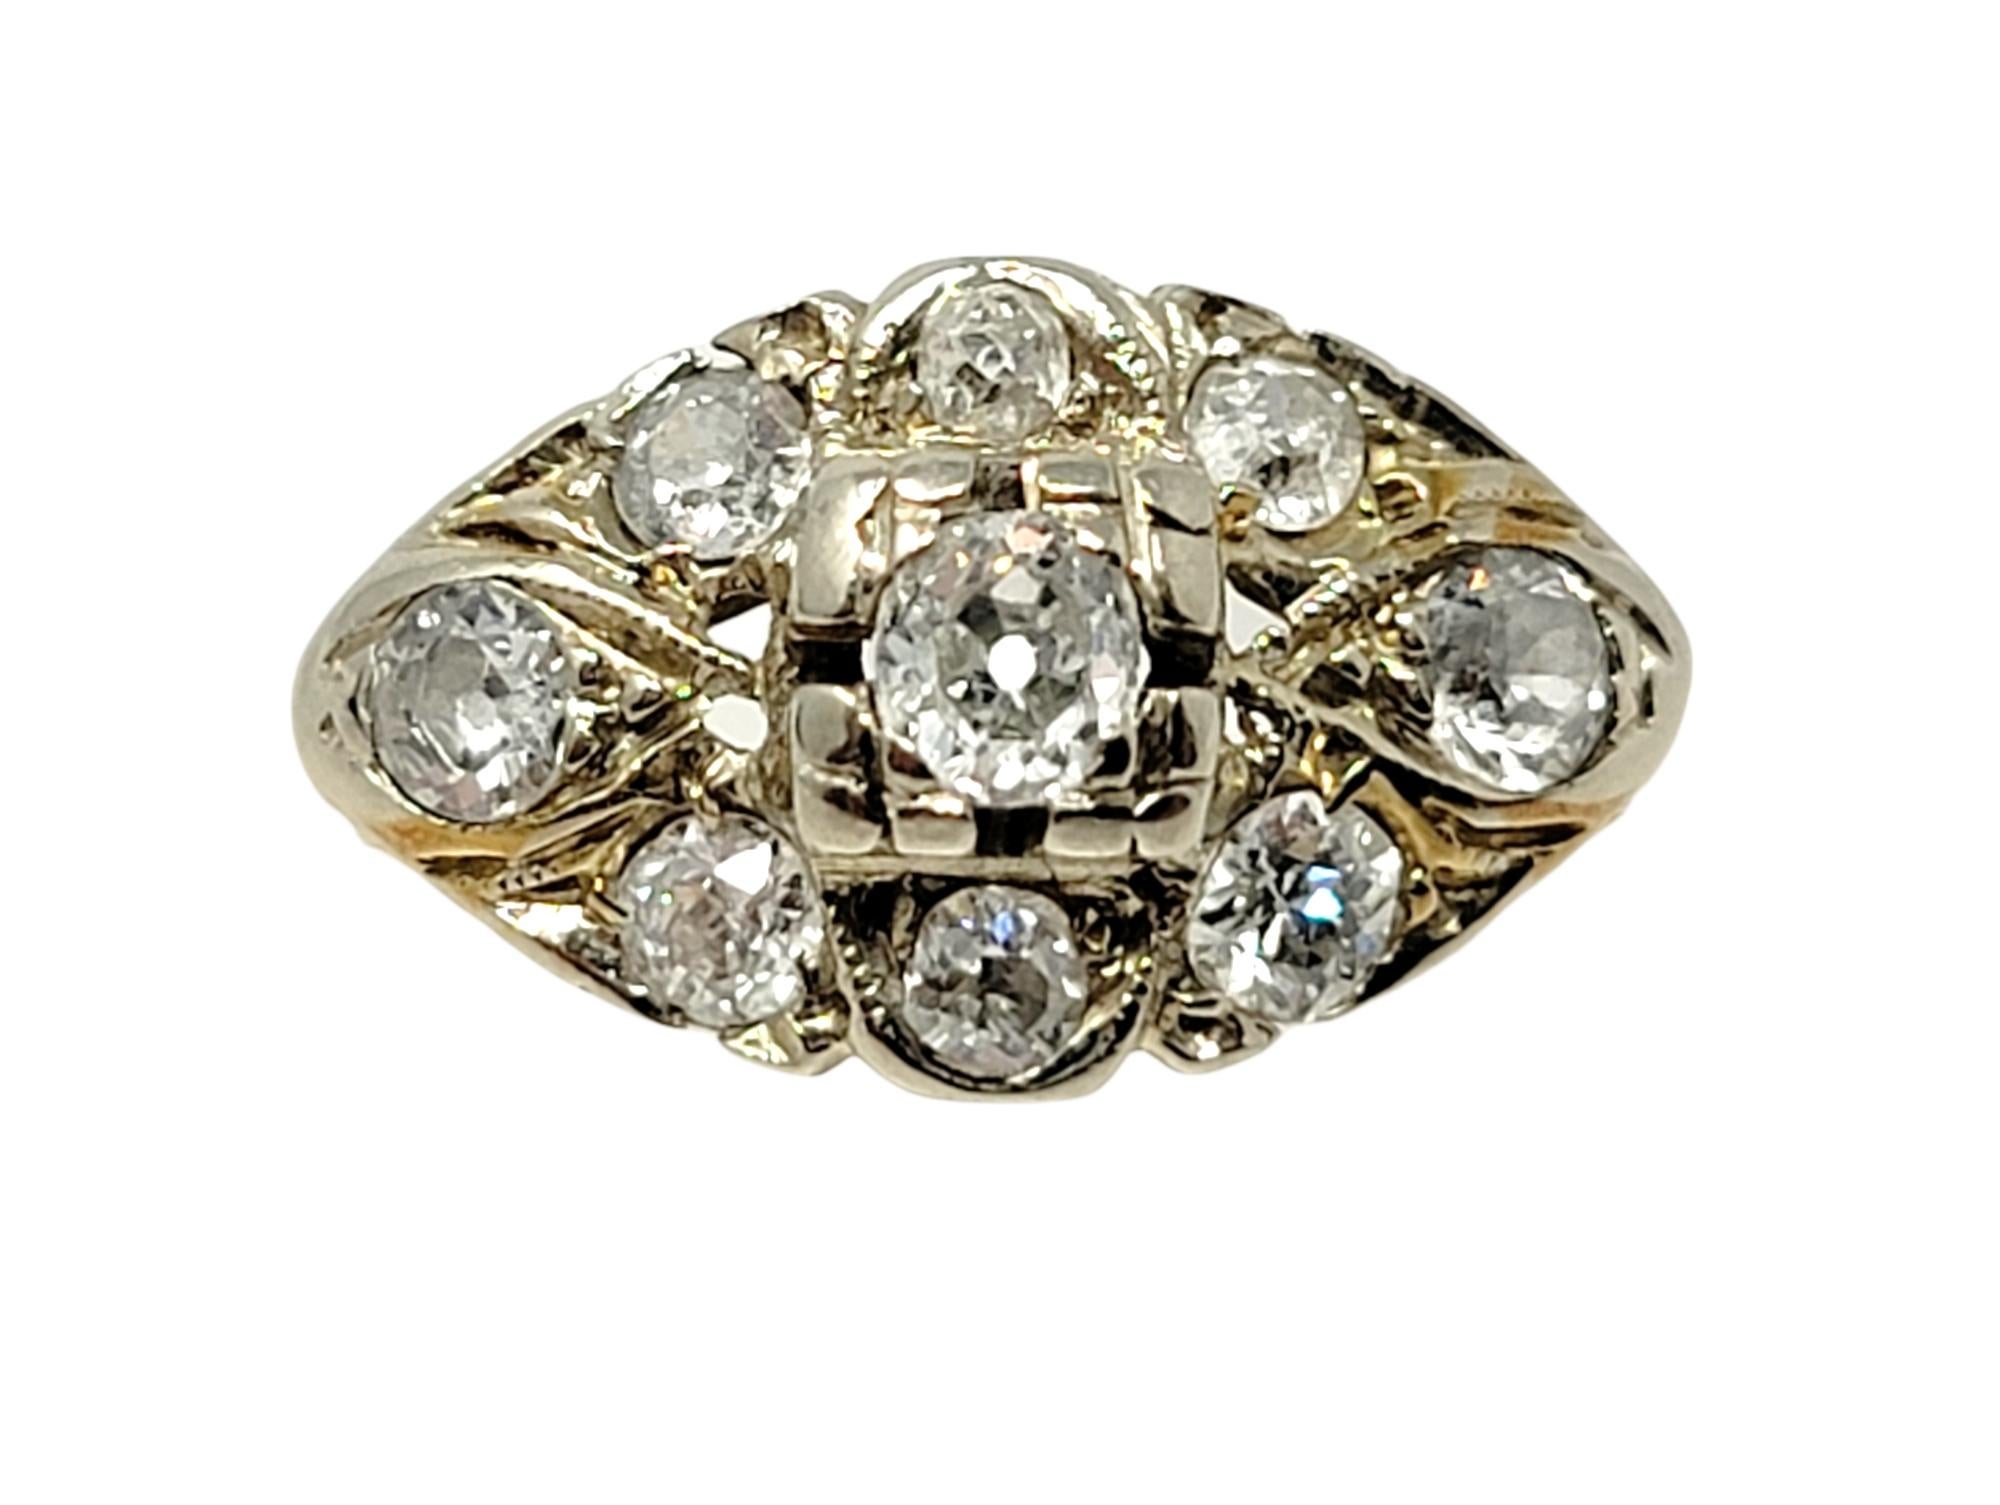 Antique Old Mine Cut Diamond Cluster Band Ring in 14 Karat Yellow Gold In Good Condition For Sale In Scottsdale, AZ